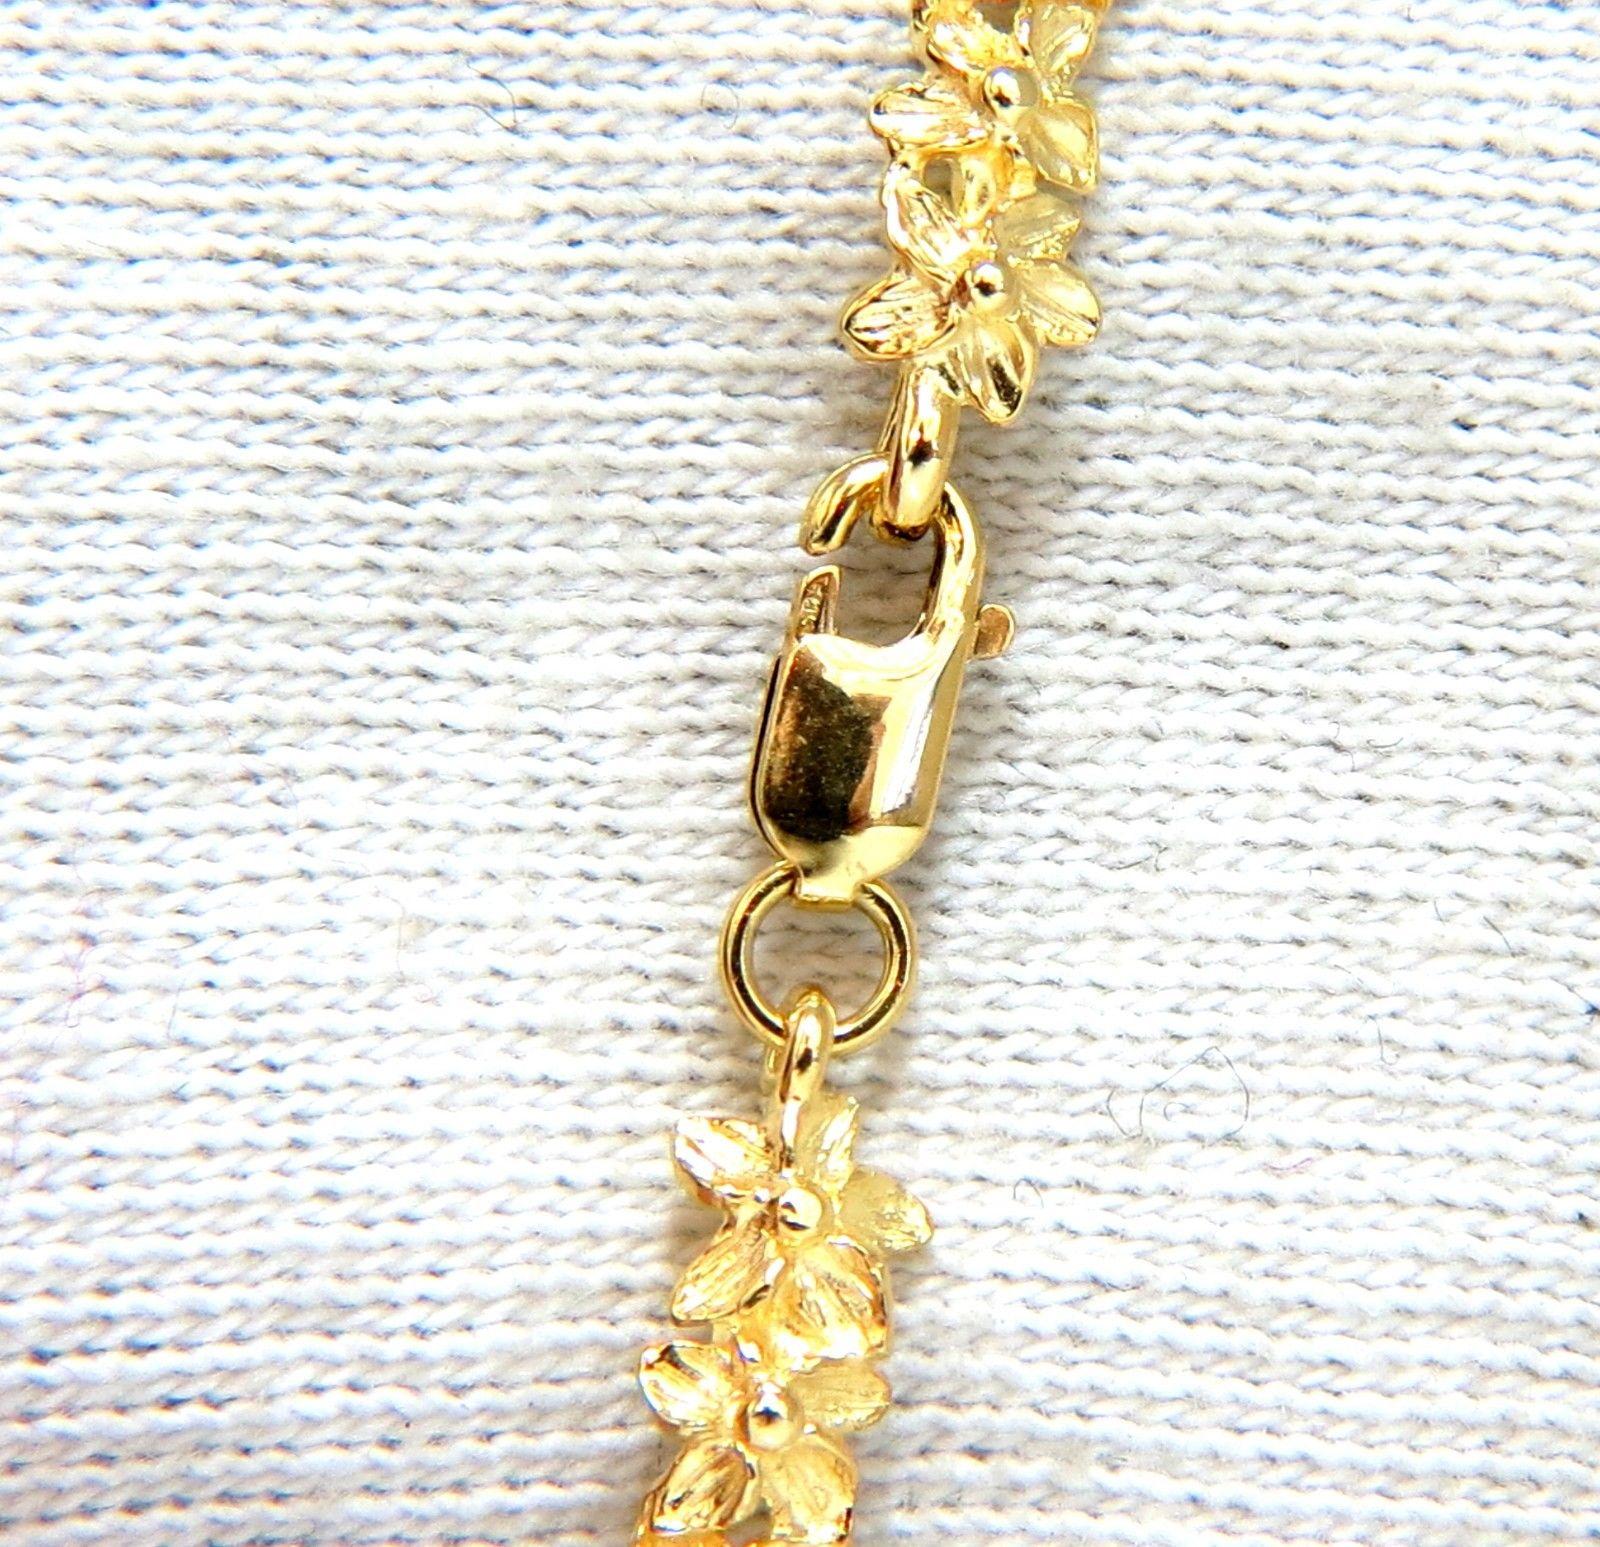 Vintage Coral Bracelet

5 Corals, Cabochon cuts  7.1 x 4.6mm

7 grams.

14kt. yellow gold. 

Measures 7 inches (wearable length)

Intricate floral detail connecting to clasp.